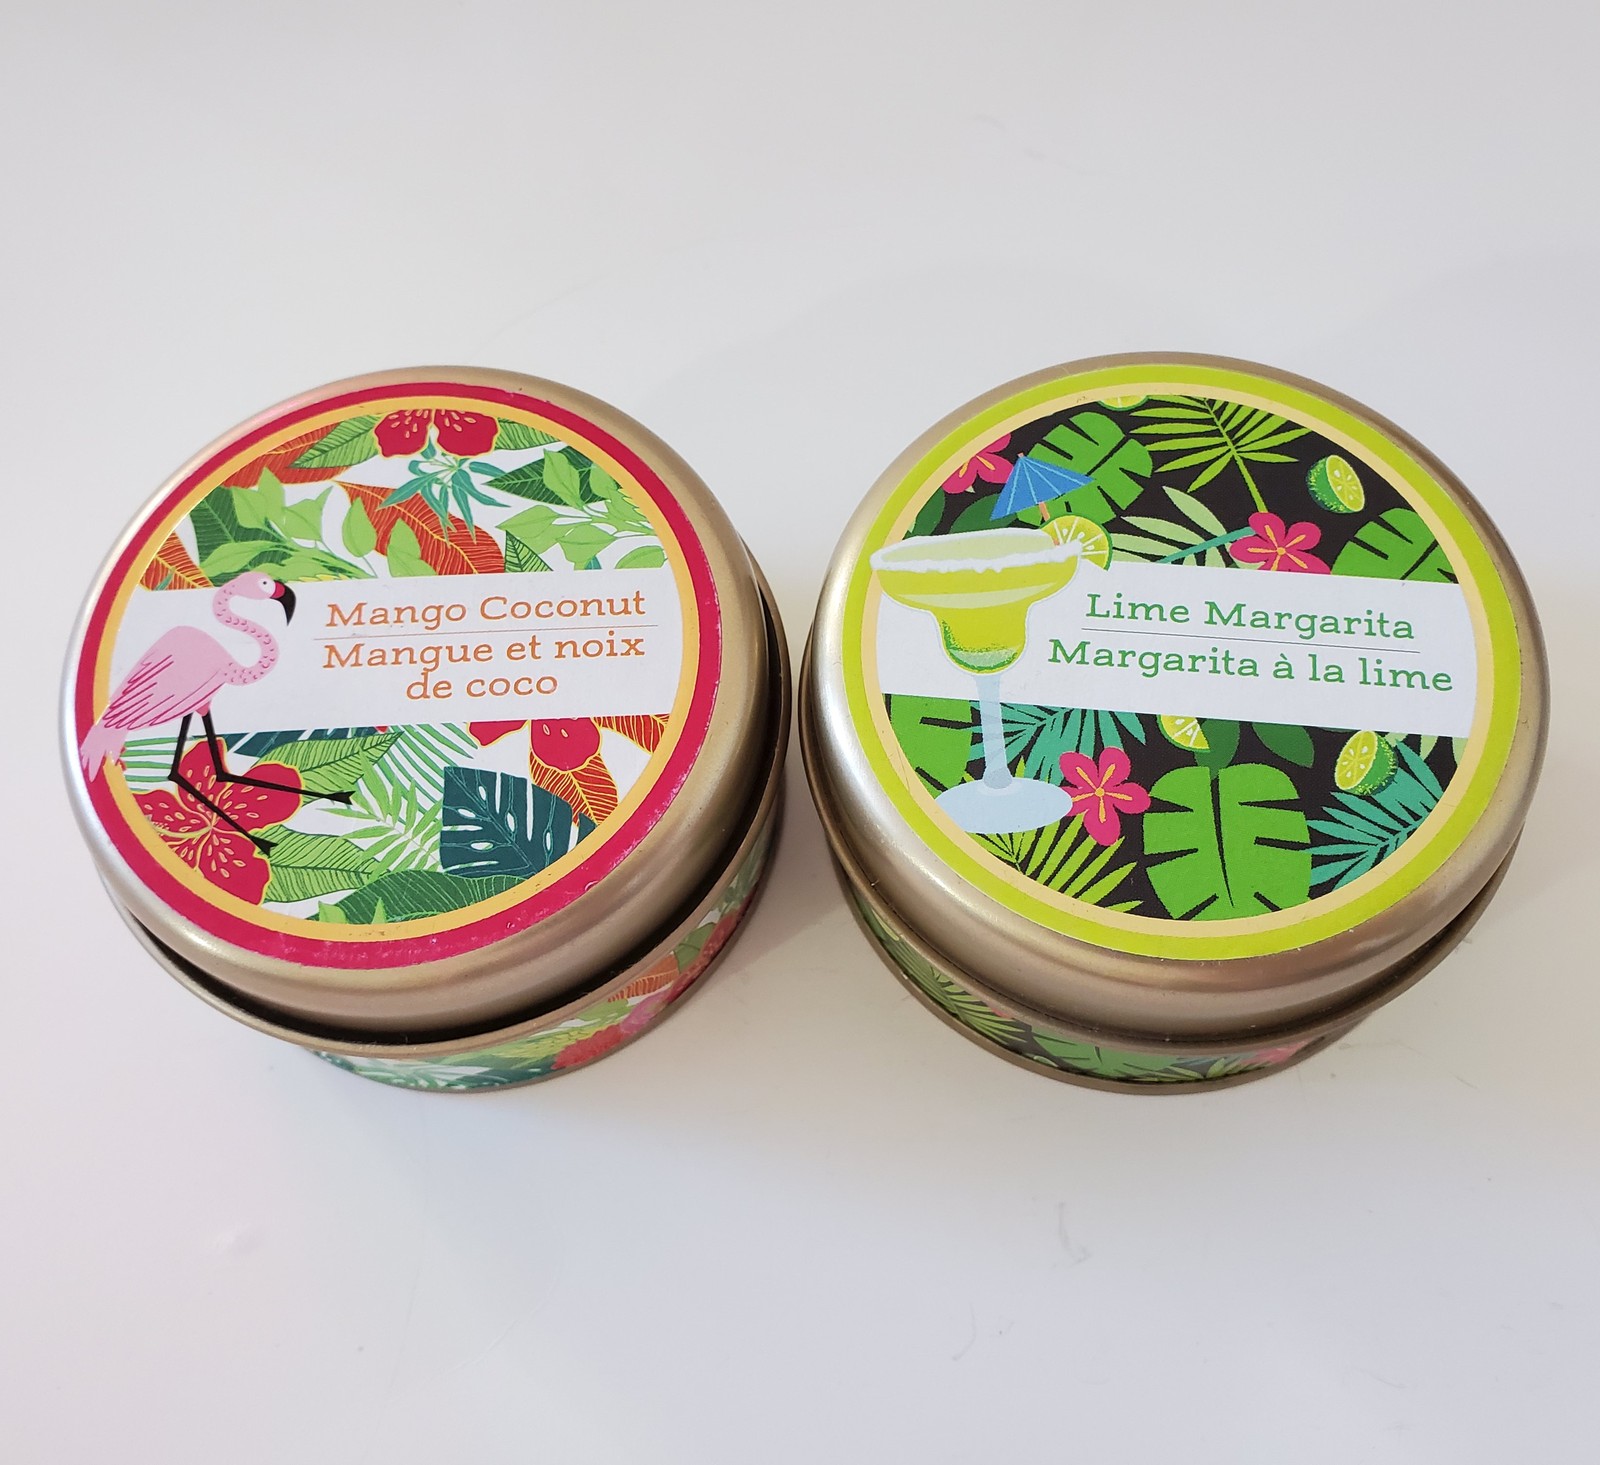 Candle in Tin, Set of 2, Lime Margarita and Mango Coconut, 3oz each - $12.99